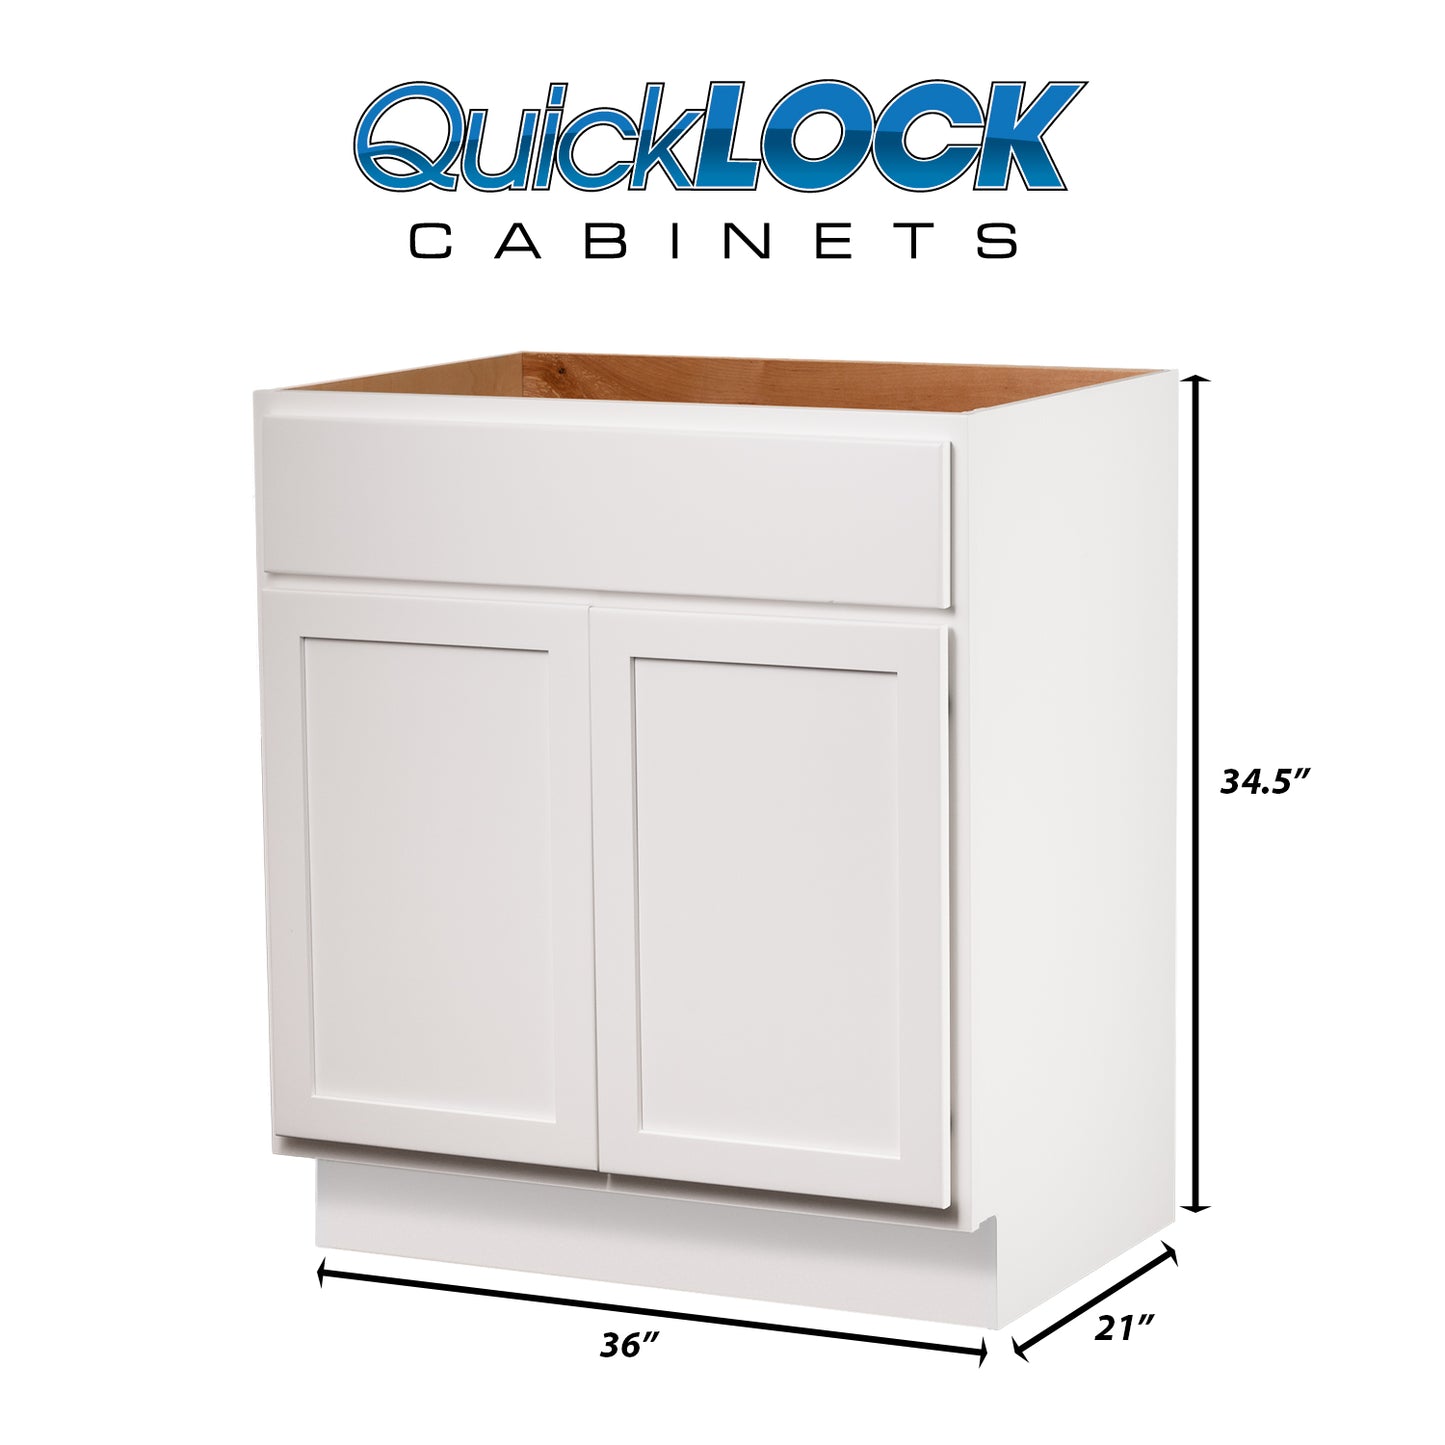 Quicklock RTA (Ready-to-Assemble) Pure White Vanity Base Cabinet | 36"Wx34.5"Hx21"D